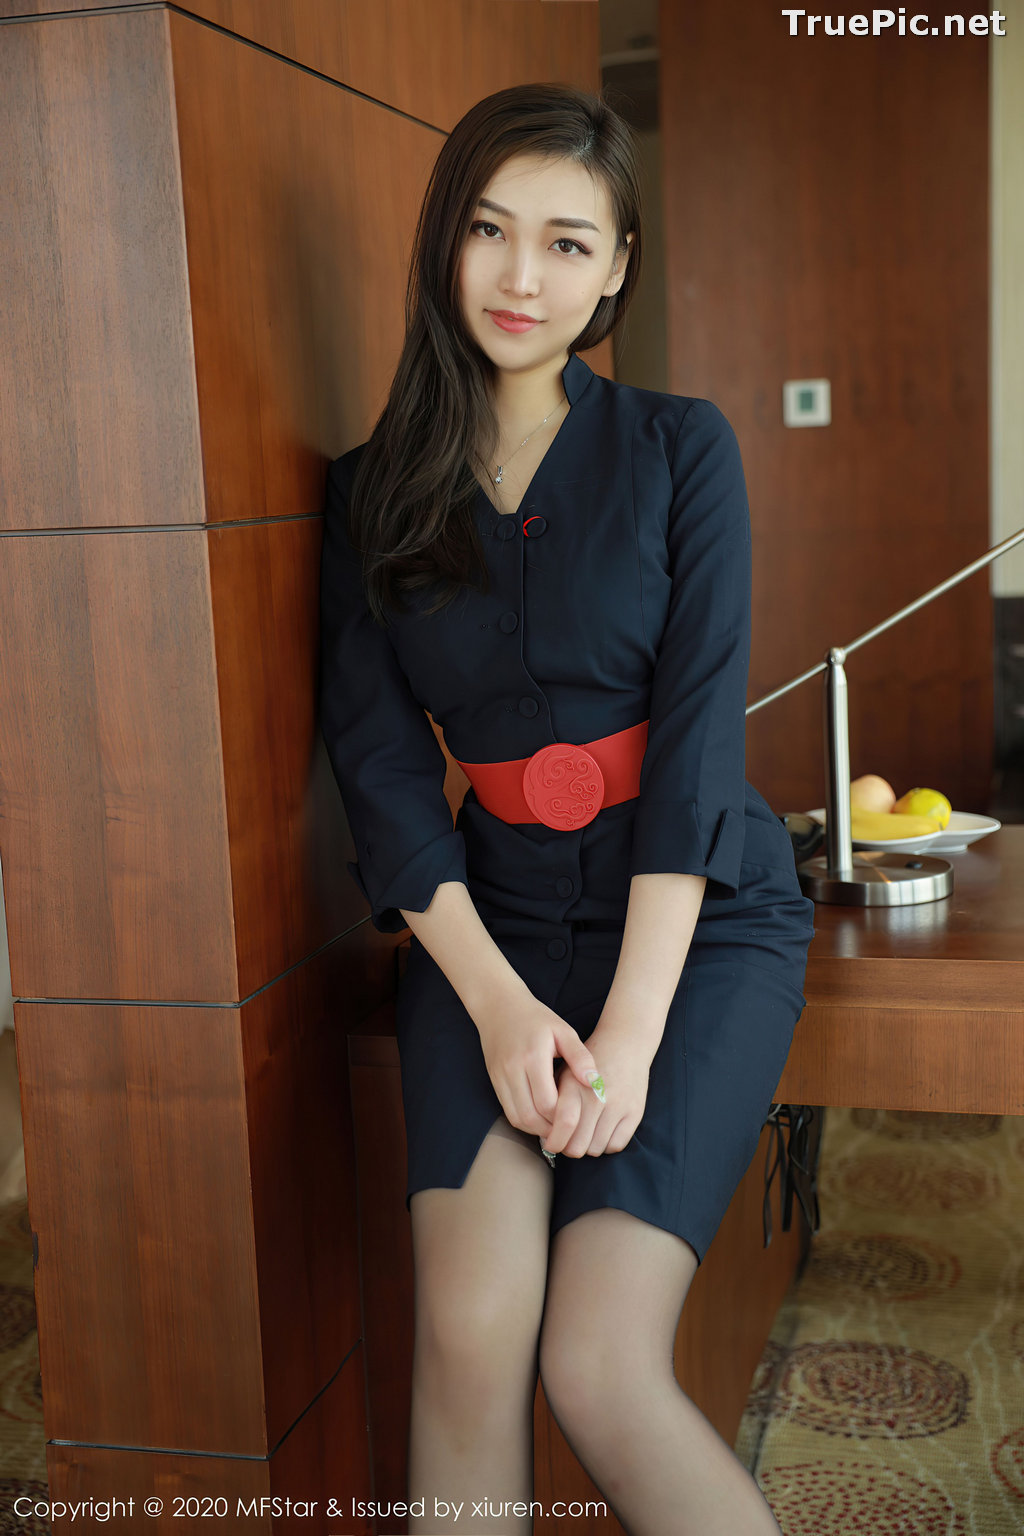 Image MFStar Vol.404 – Chinese Model – Zheng Ying Shan (郑颖姗) – Sexy Office Girl - TruePic.net - Picture-14